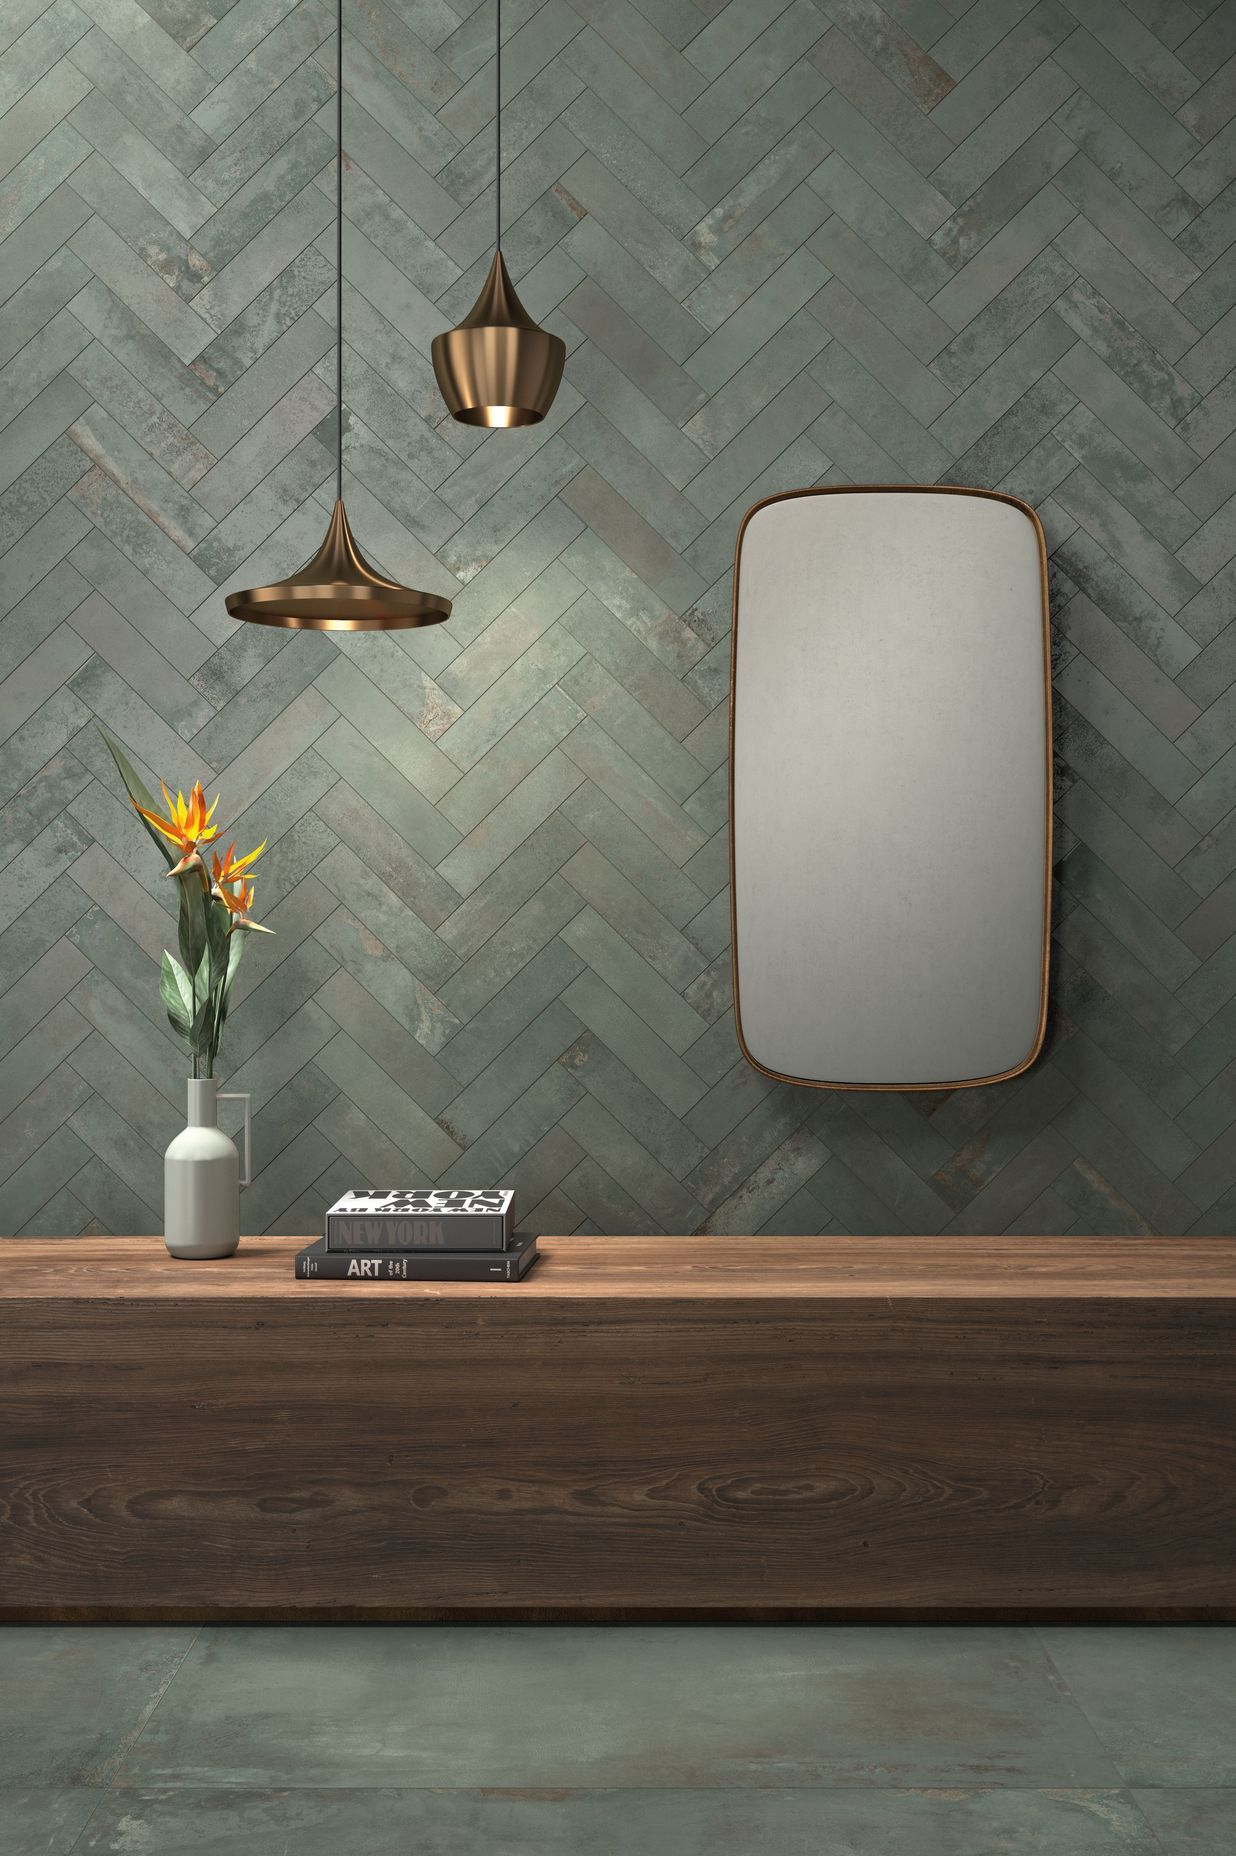 The OXID wall tile range gives off an industrial mood.